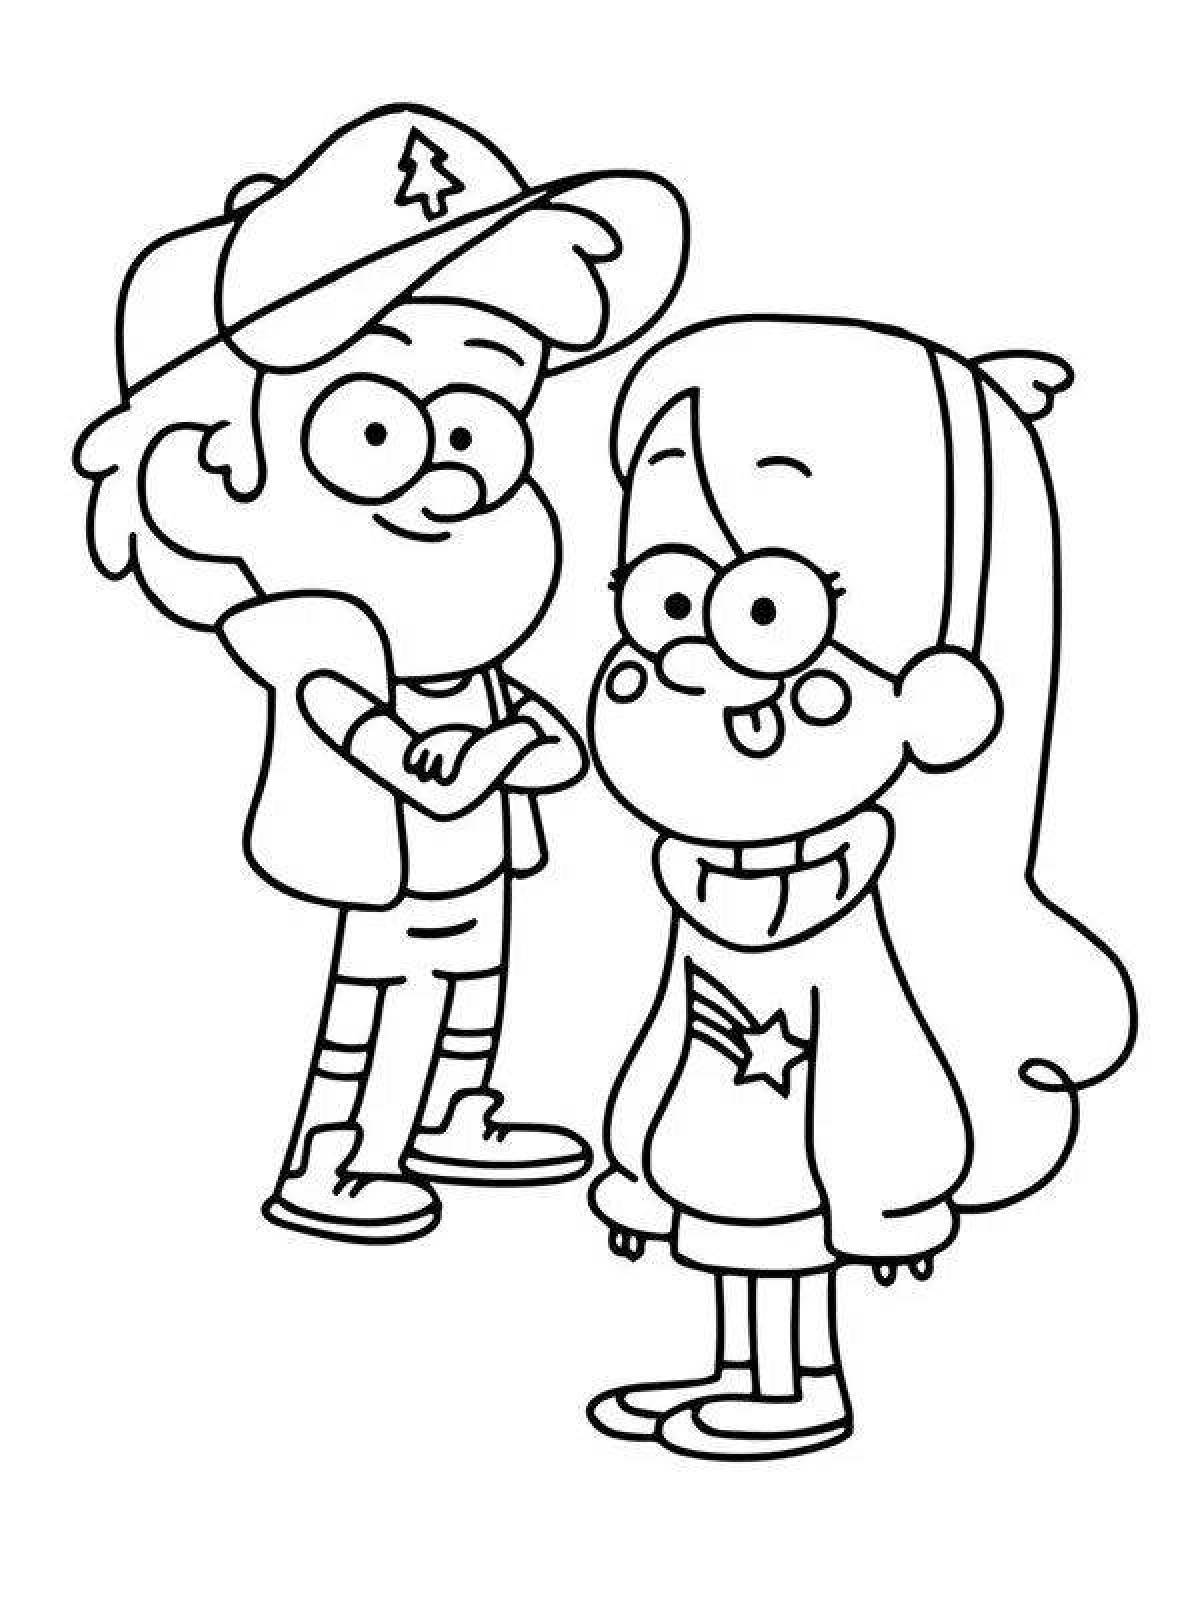 Gravity falls live coloring for girls